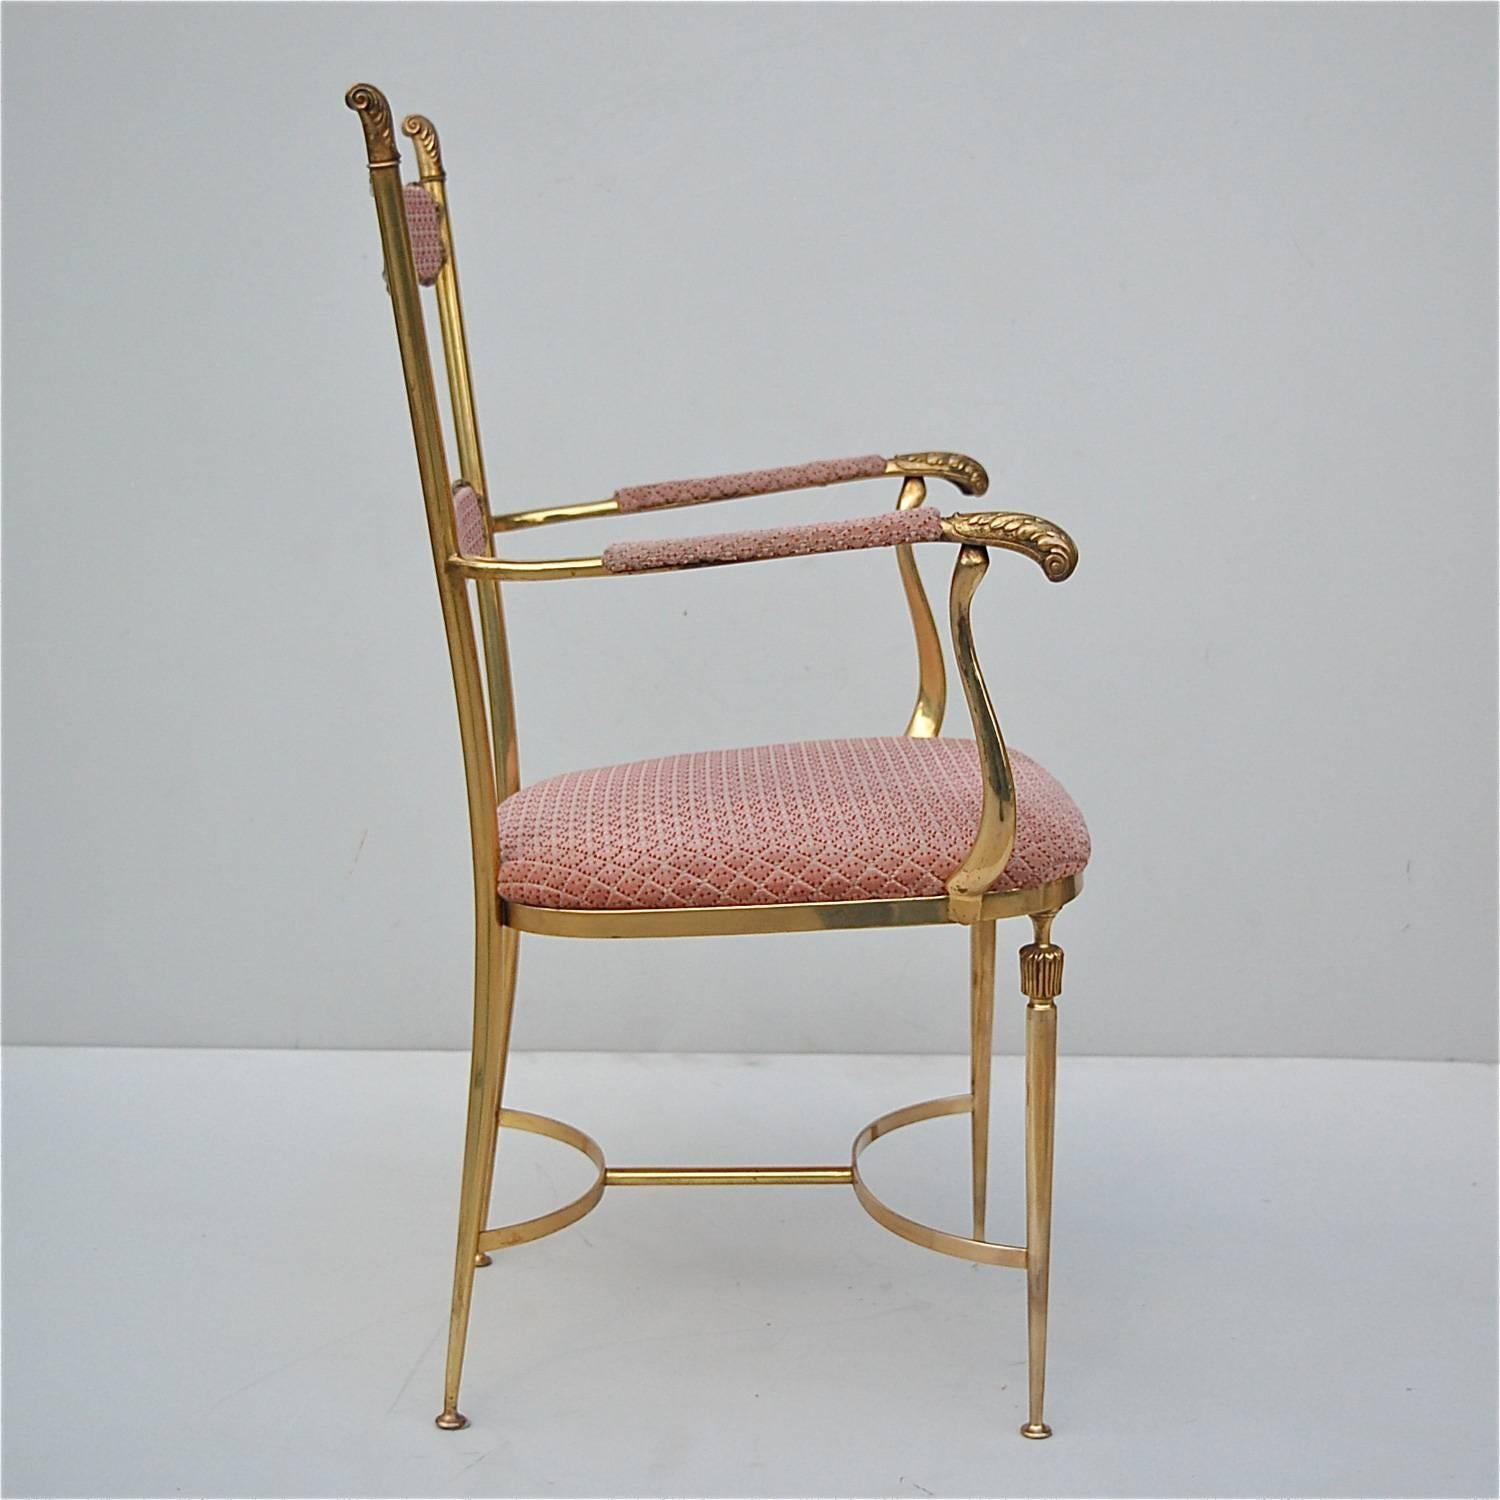 Solid brass chair designed in a French neoclassical style and a good alternative to the more well-known Italian Chiavari chair. Its use is as a side chair to accompany a dressing table, desk or give a glamorous touch to a hallway, bathroom, bedroom,